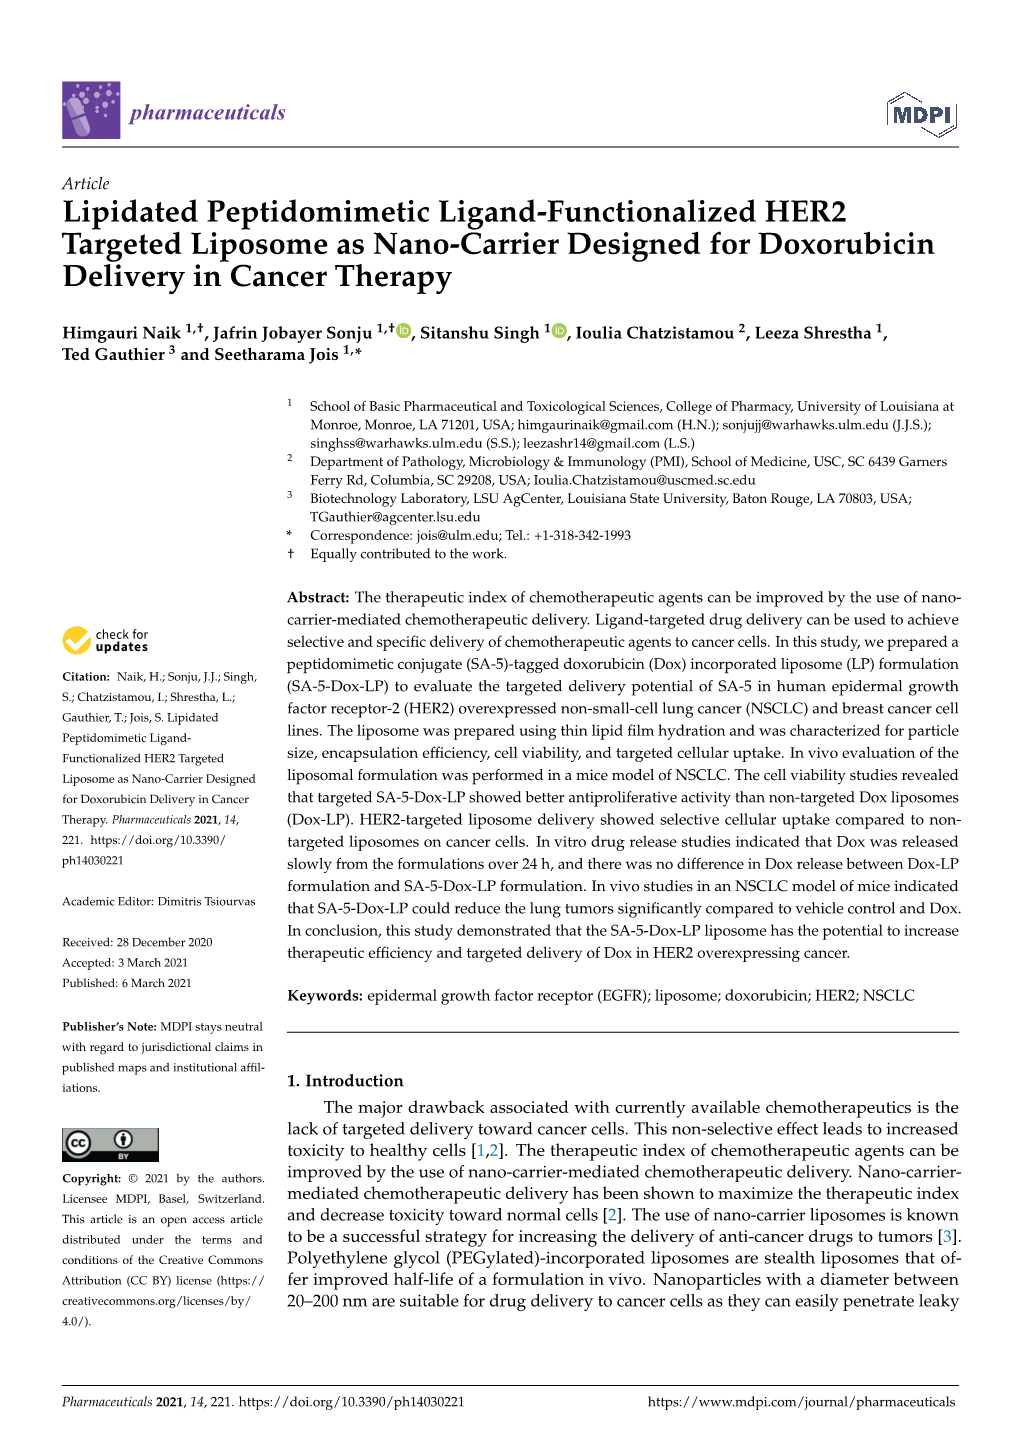 Lipidated Peptidomimetic Ligand-Functionalized HER2 Targeted Liposome As Nano-Carrier Designed for Doxorubicin Delivery in Cancer Therapy